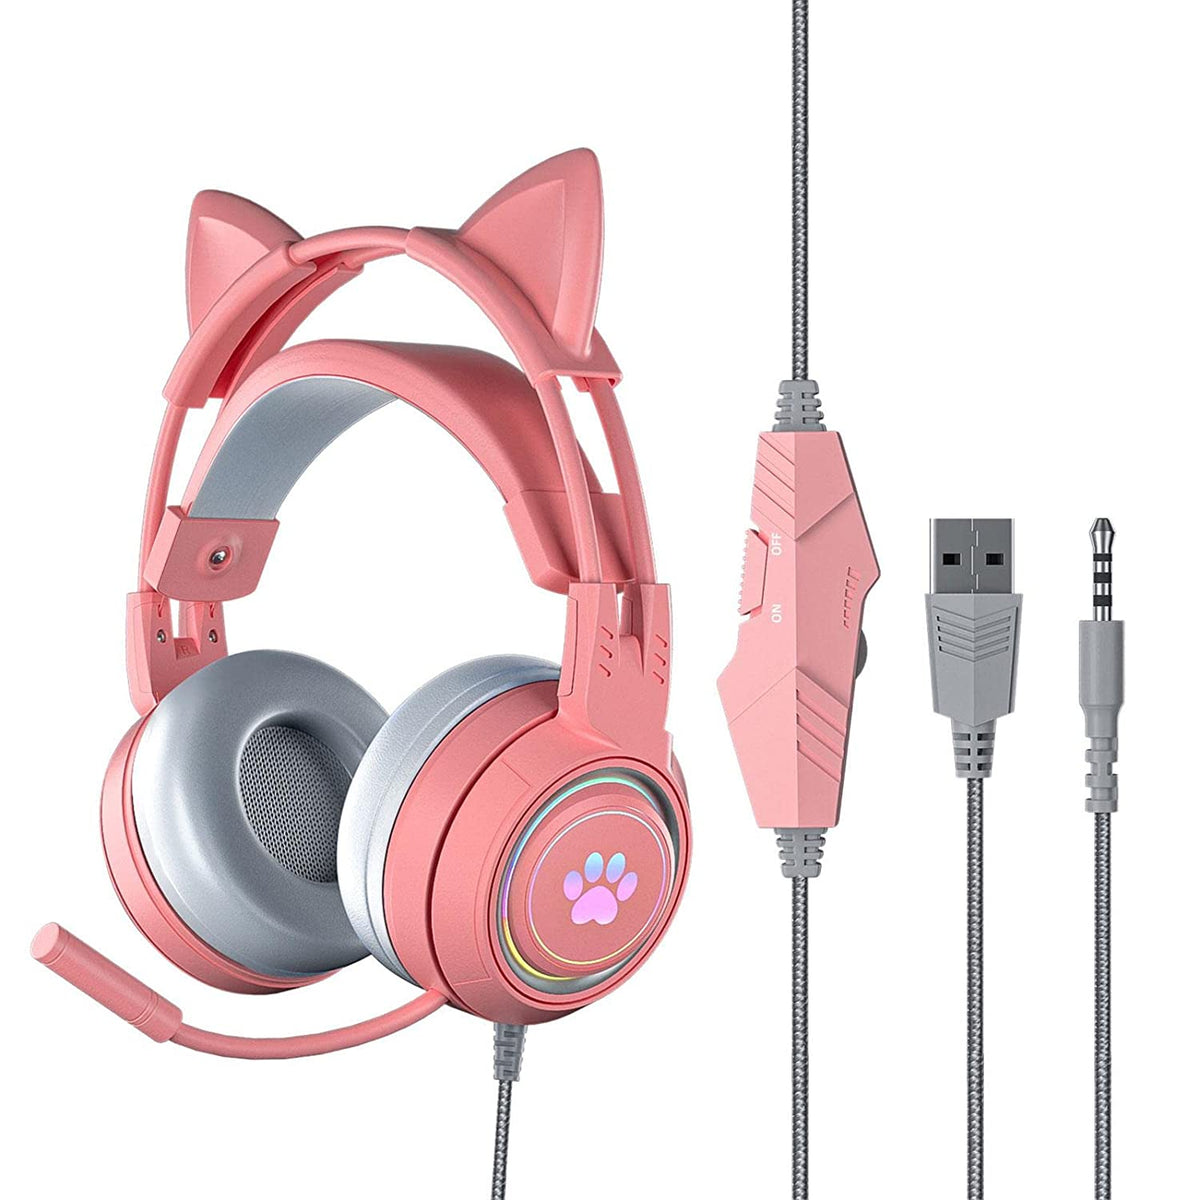 Generic Cat Ears Gaming Headset Wired Headphone With Mic Noise-Cancelling  7.1 Channel Stereo For Ps4/phone/pc Gamer Girls Headset Fones